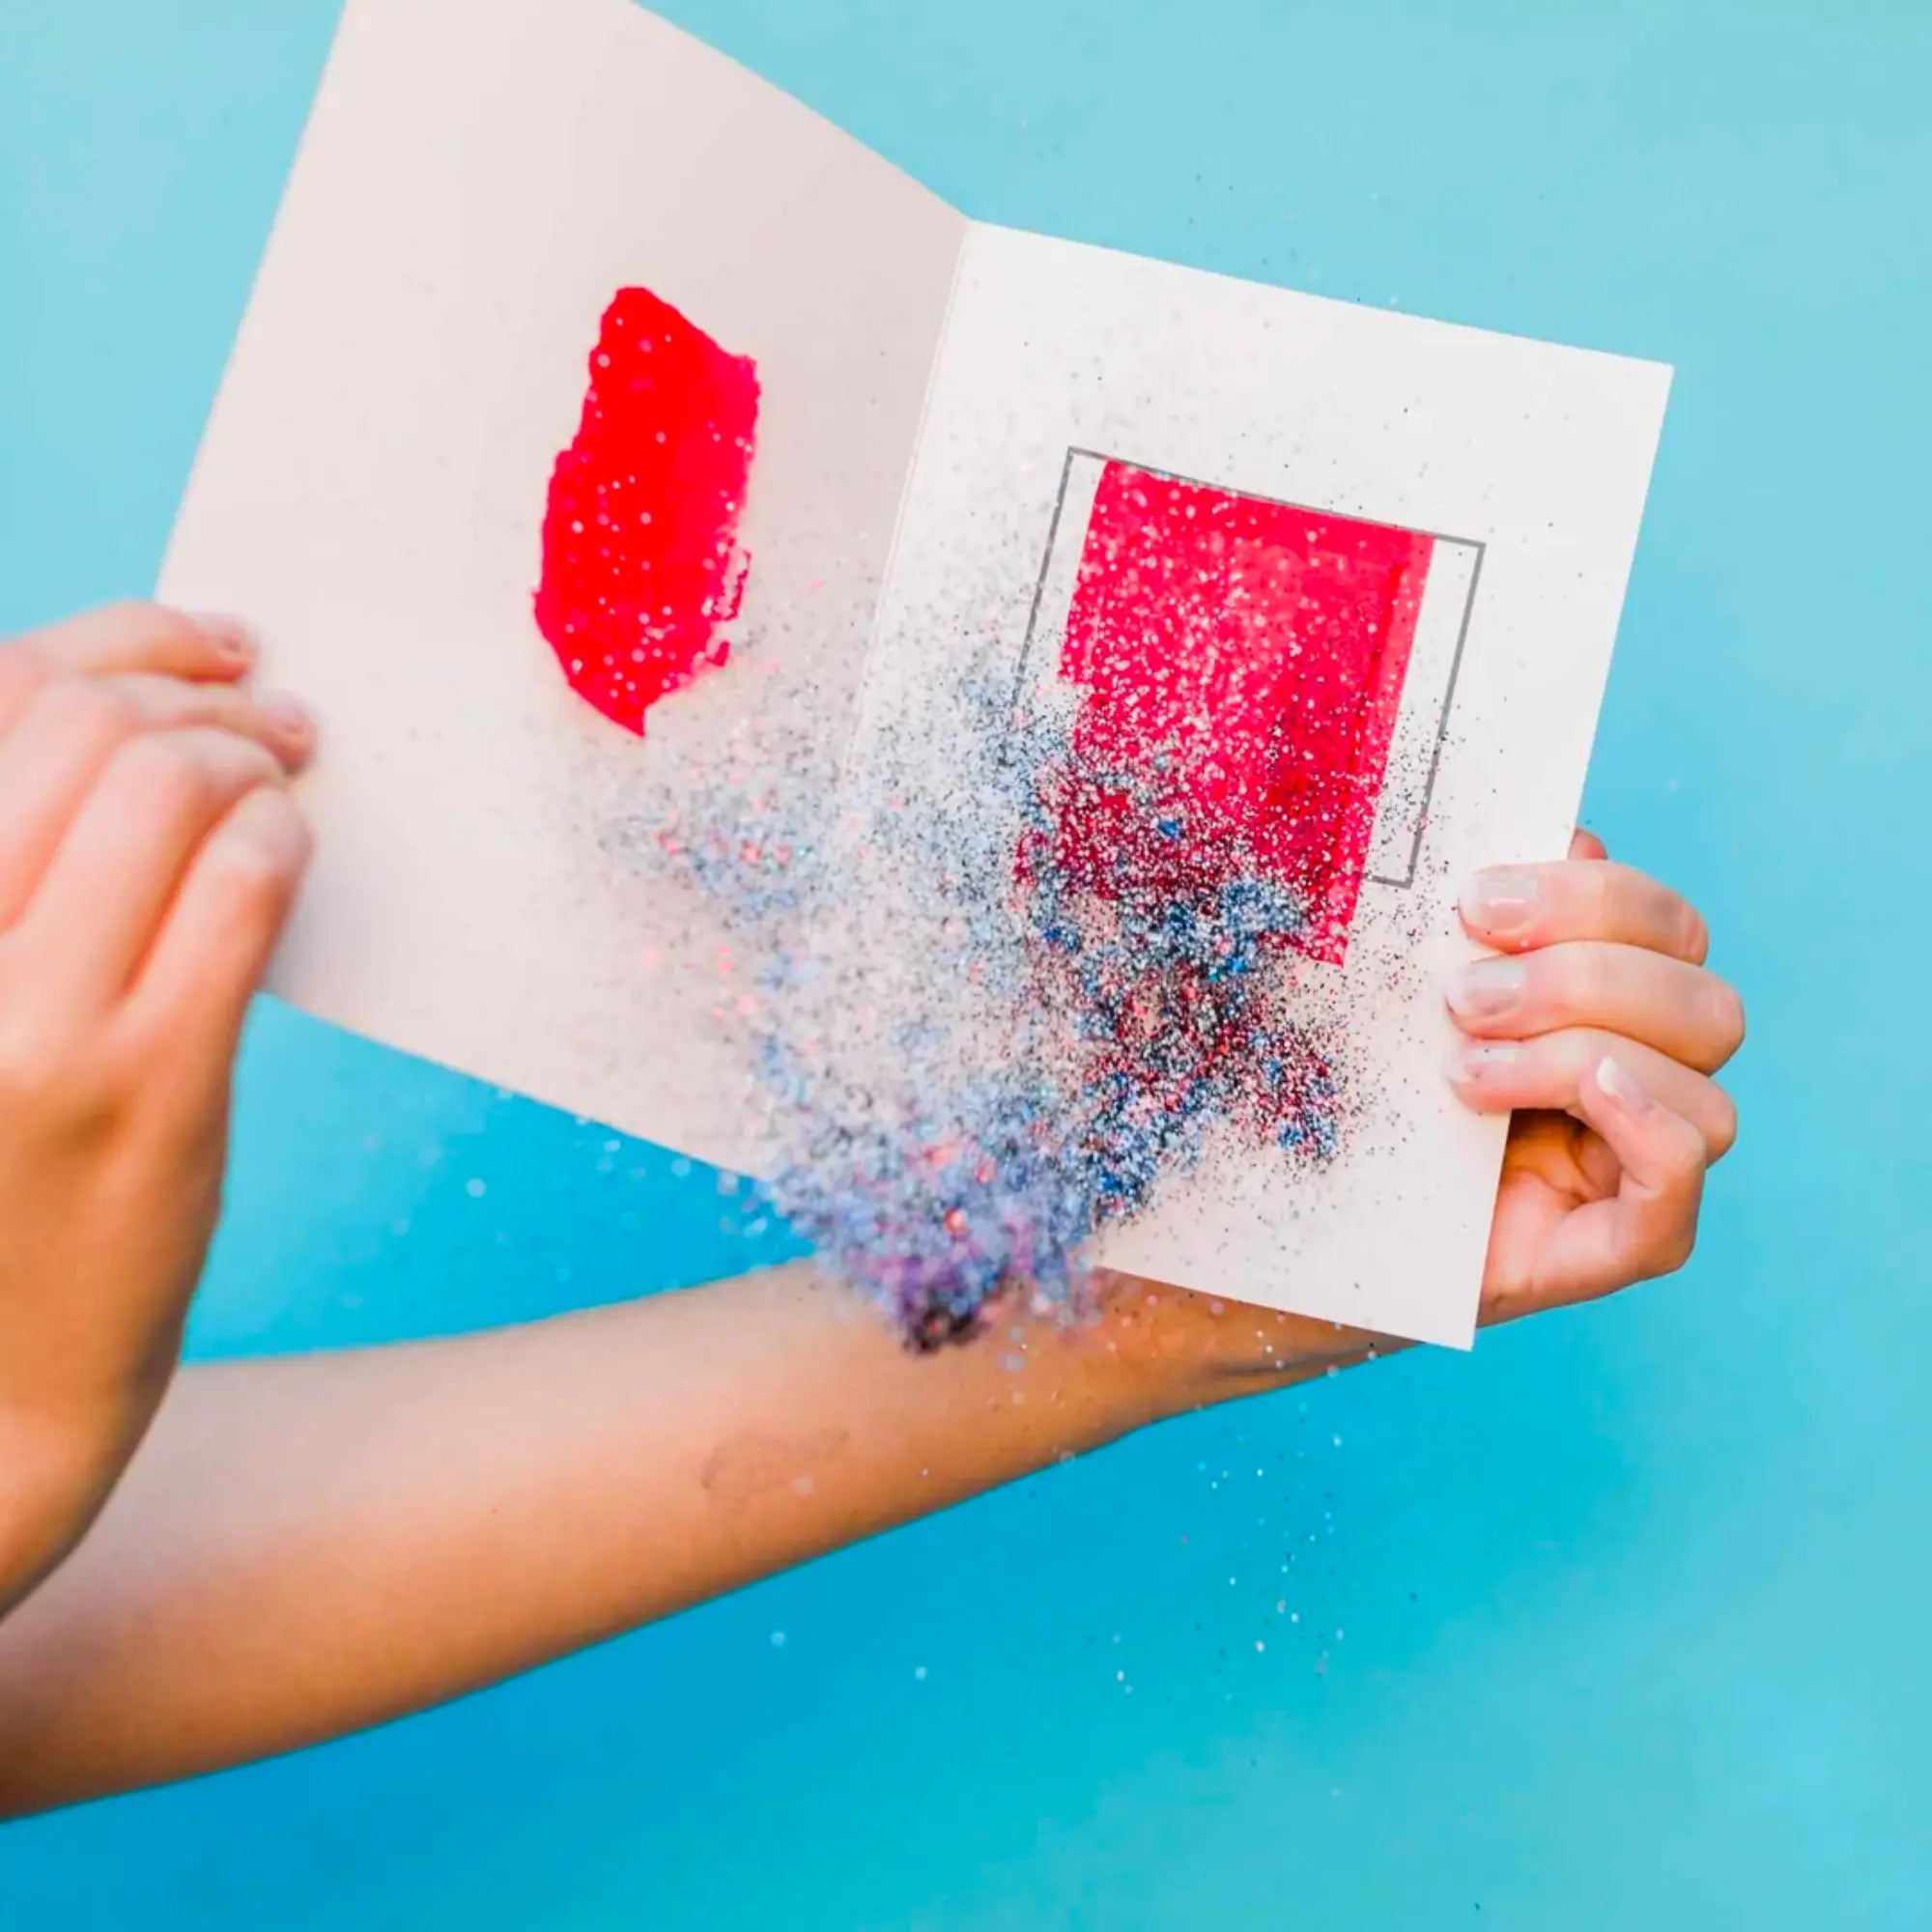 Glitter Bomb Cards Pranks Anonymous send hilarious pranks and gag gifts to your friends or family.